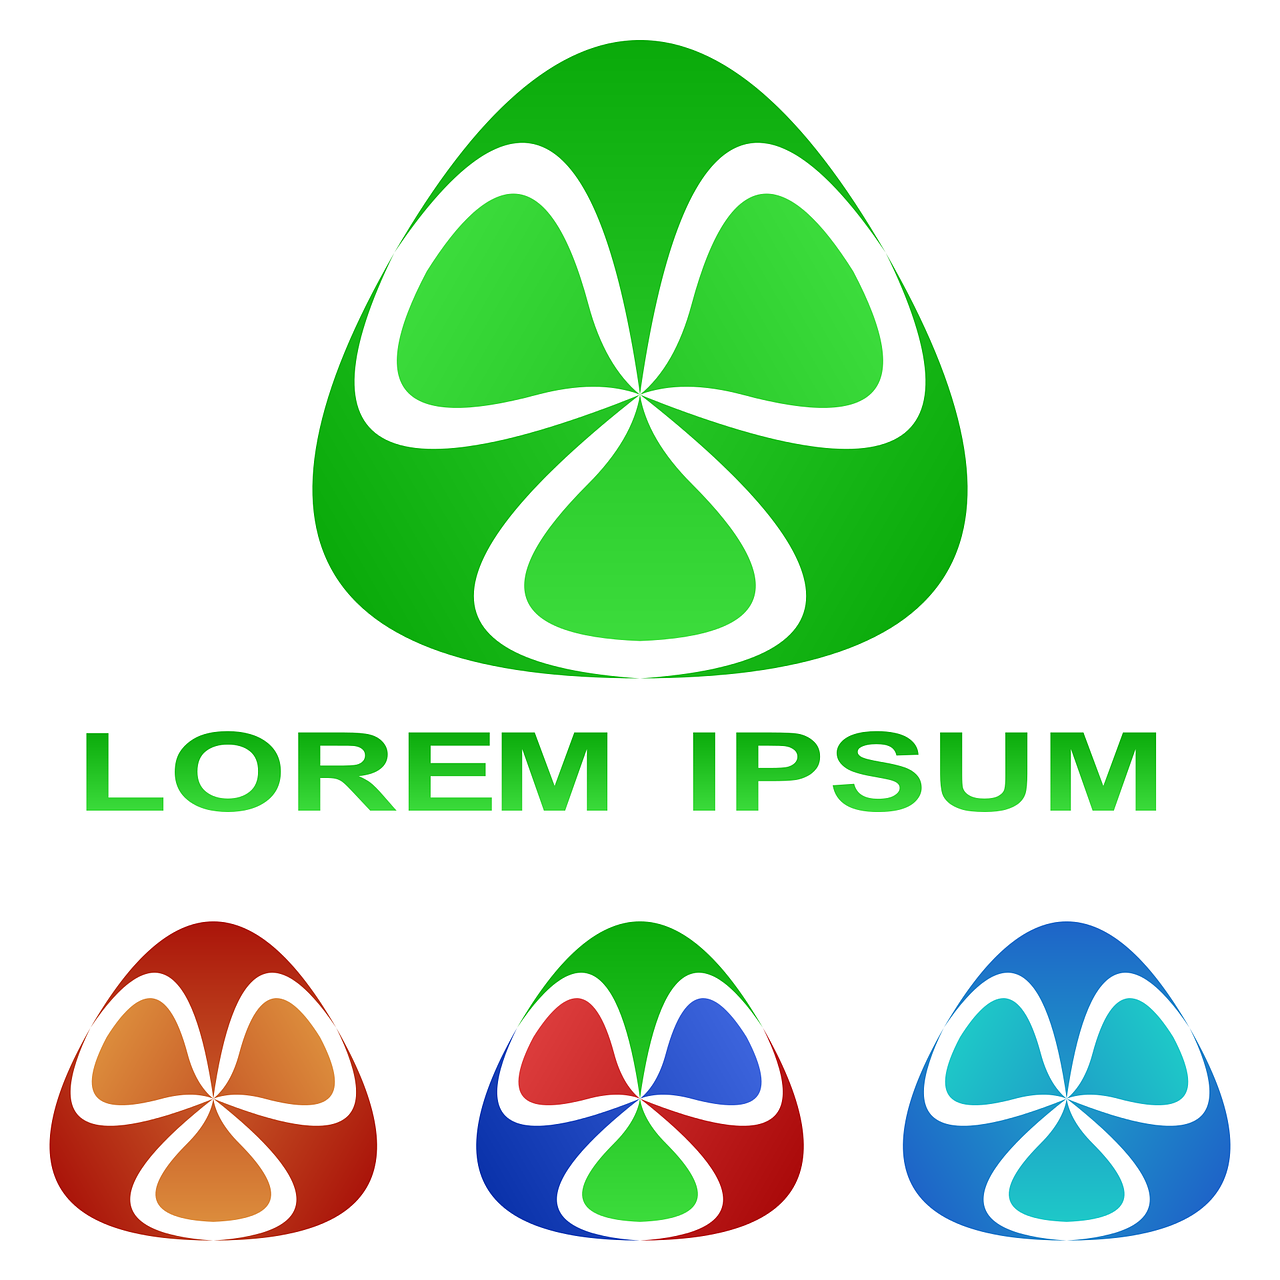 a green leaf logo with four different colors, inspired by Luigi Kasimir, symbolism, eggs, fantasy game spell icon, lorem ipsum dolor sit amet, official screenshot